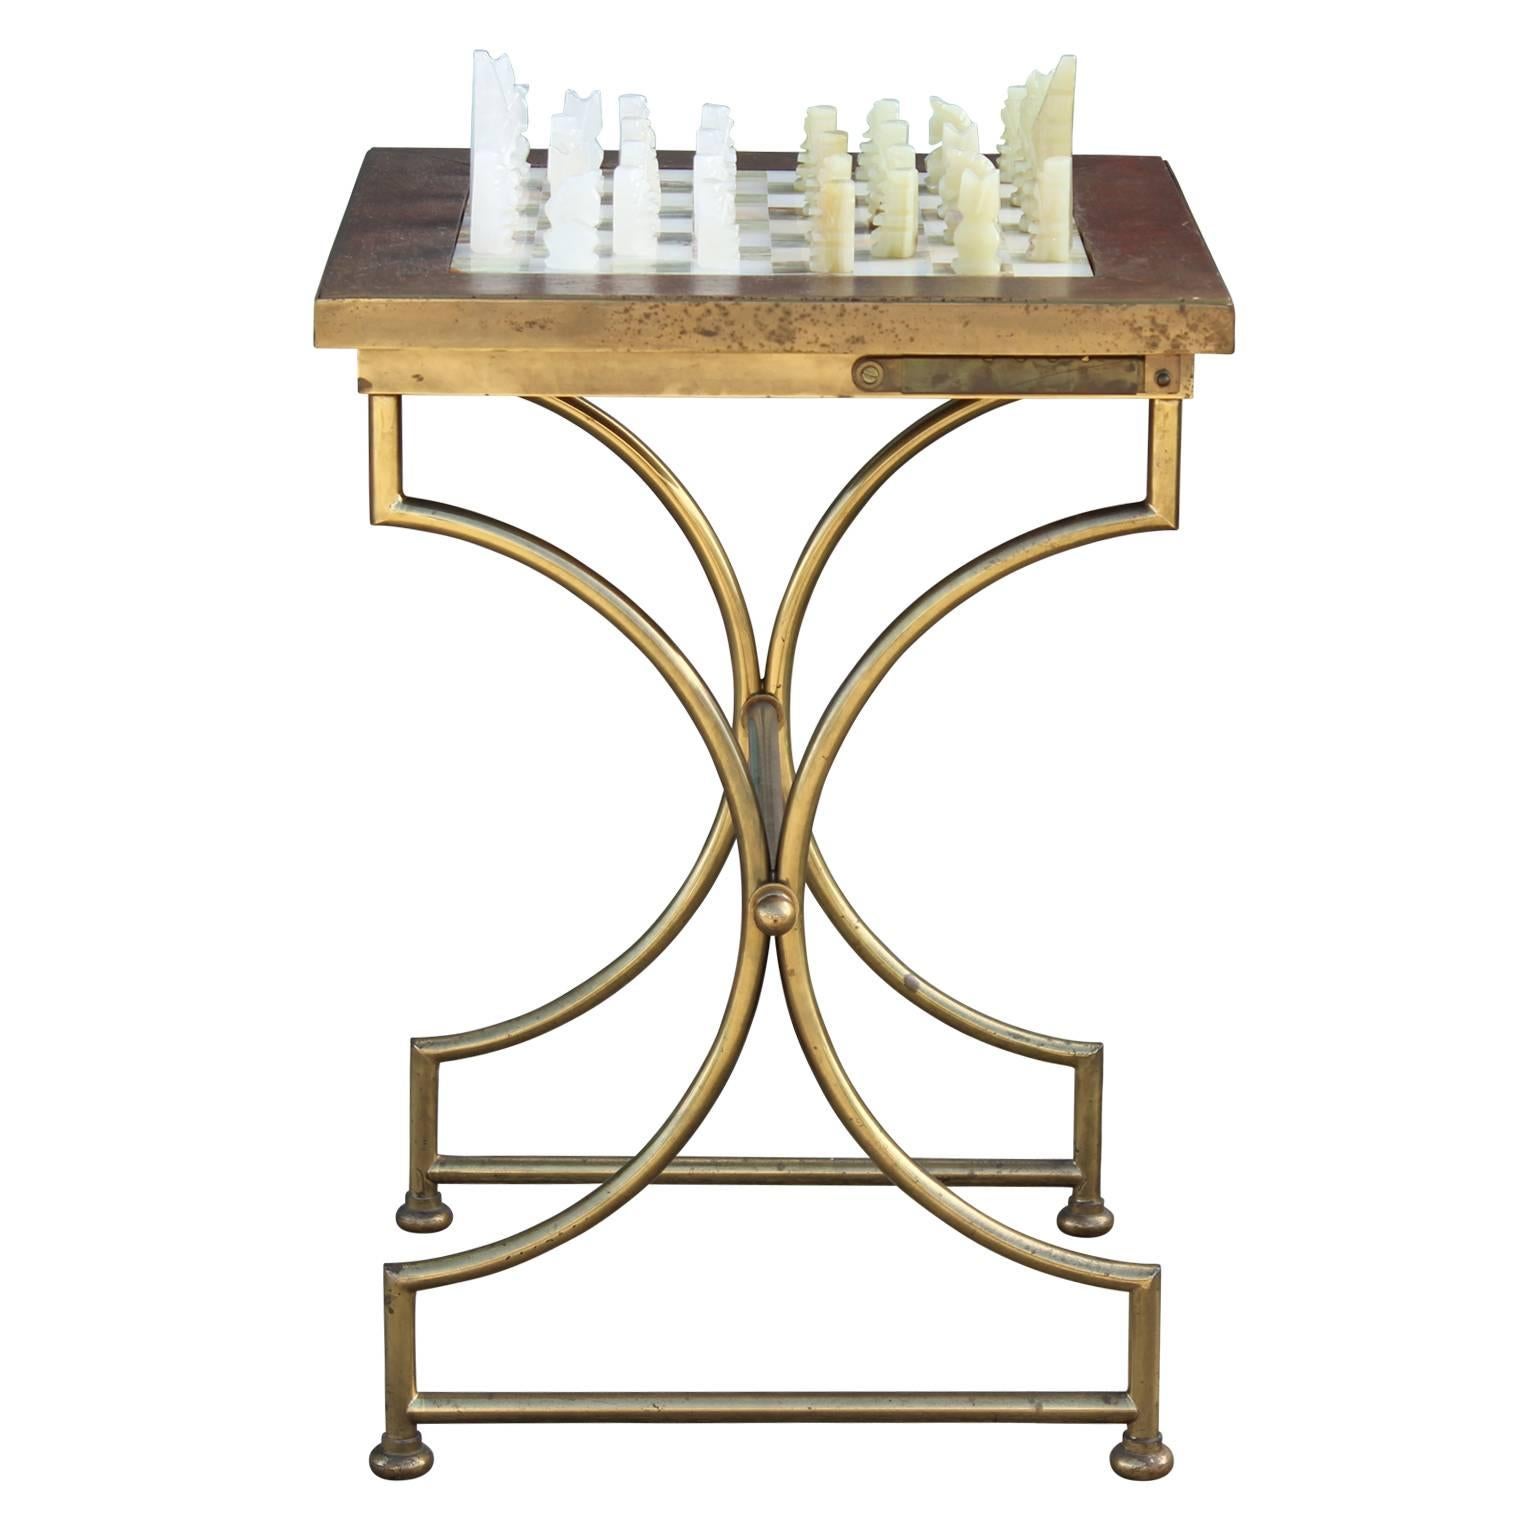 Modern Square Onyx Chess Table with Brass Base and Onyx Chess Set